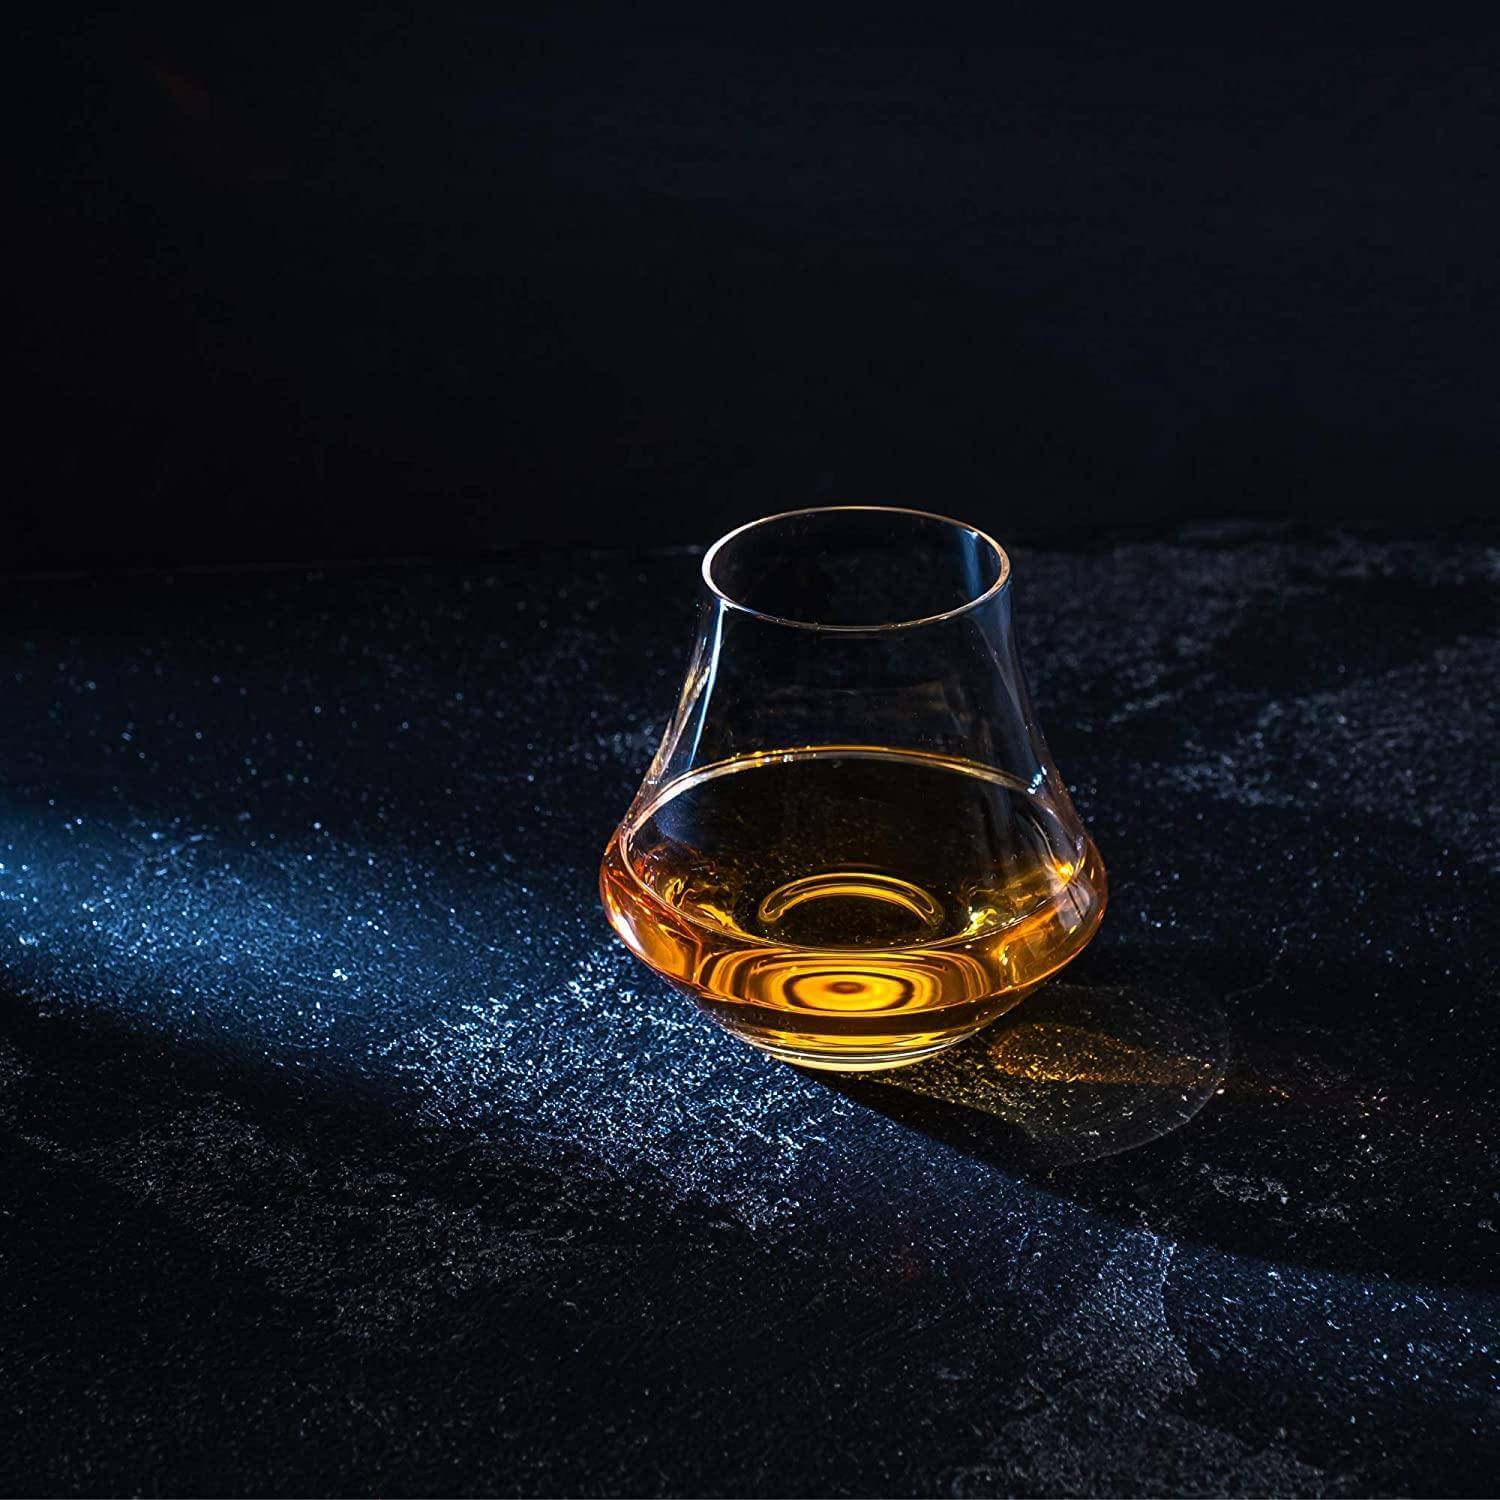 The Connoisseur's Set - Nosing Glass Edition by R.O.C.K.S. Whiskey Chilling Stones